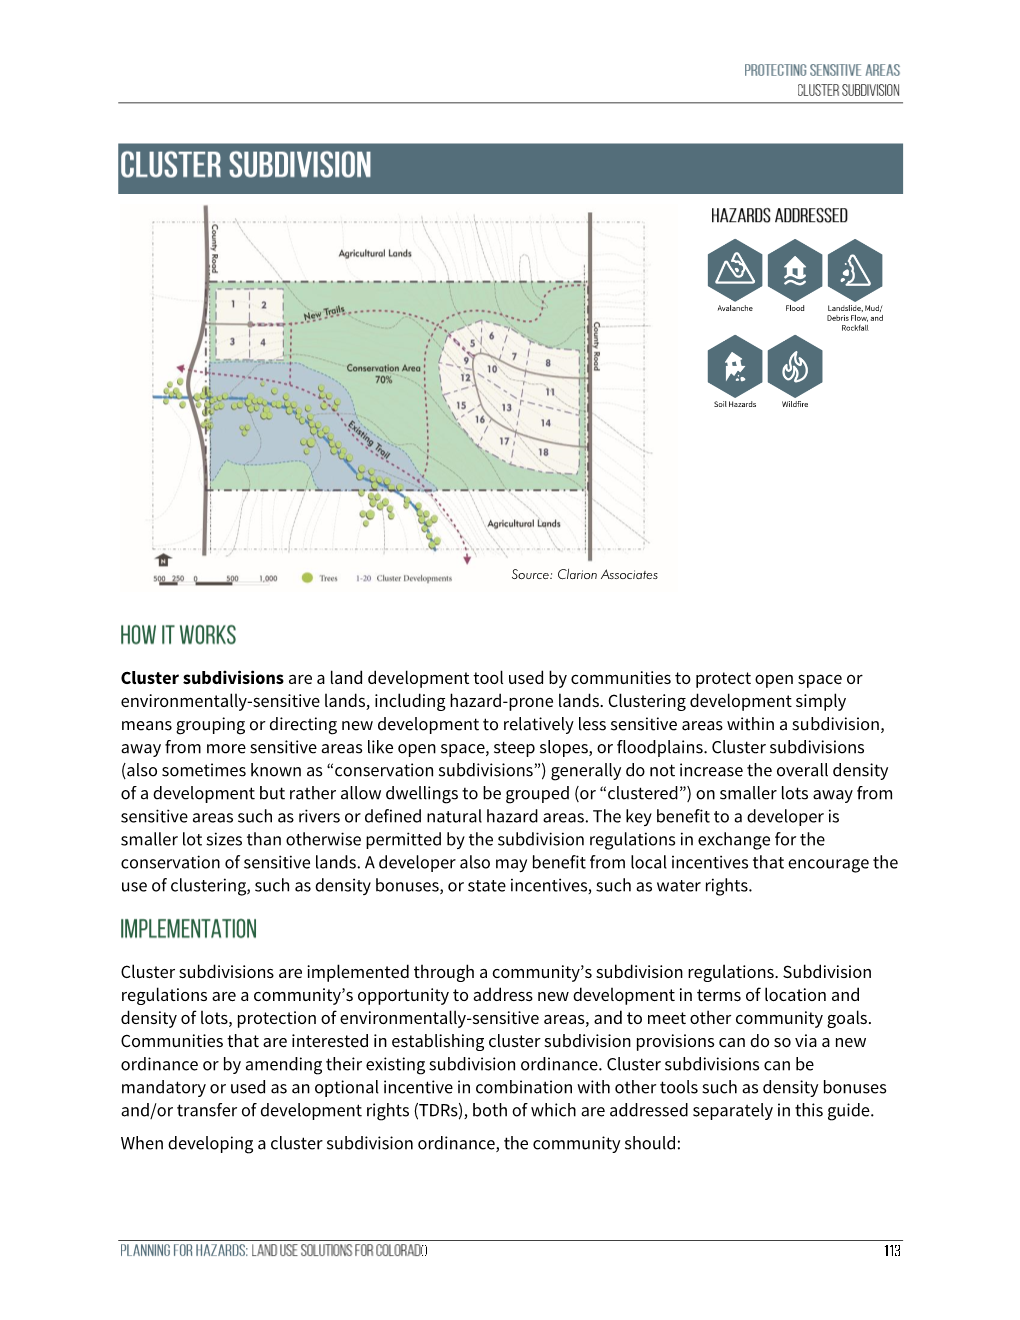 Cluster Subdivisions Are a Land Development Tool Used by Communities to Protect Open Space Or Environmentally-Sensitive Lands, Including Hazard-Prone Lands